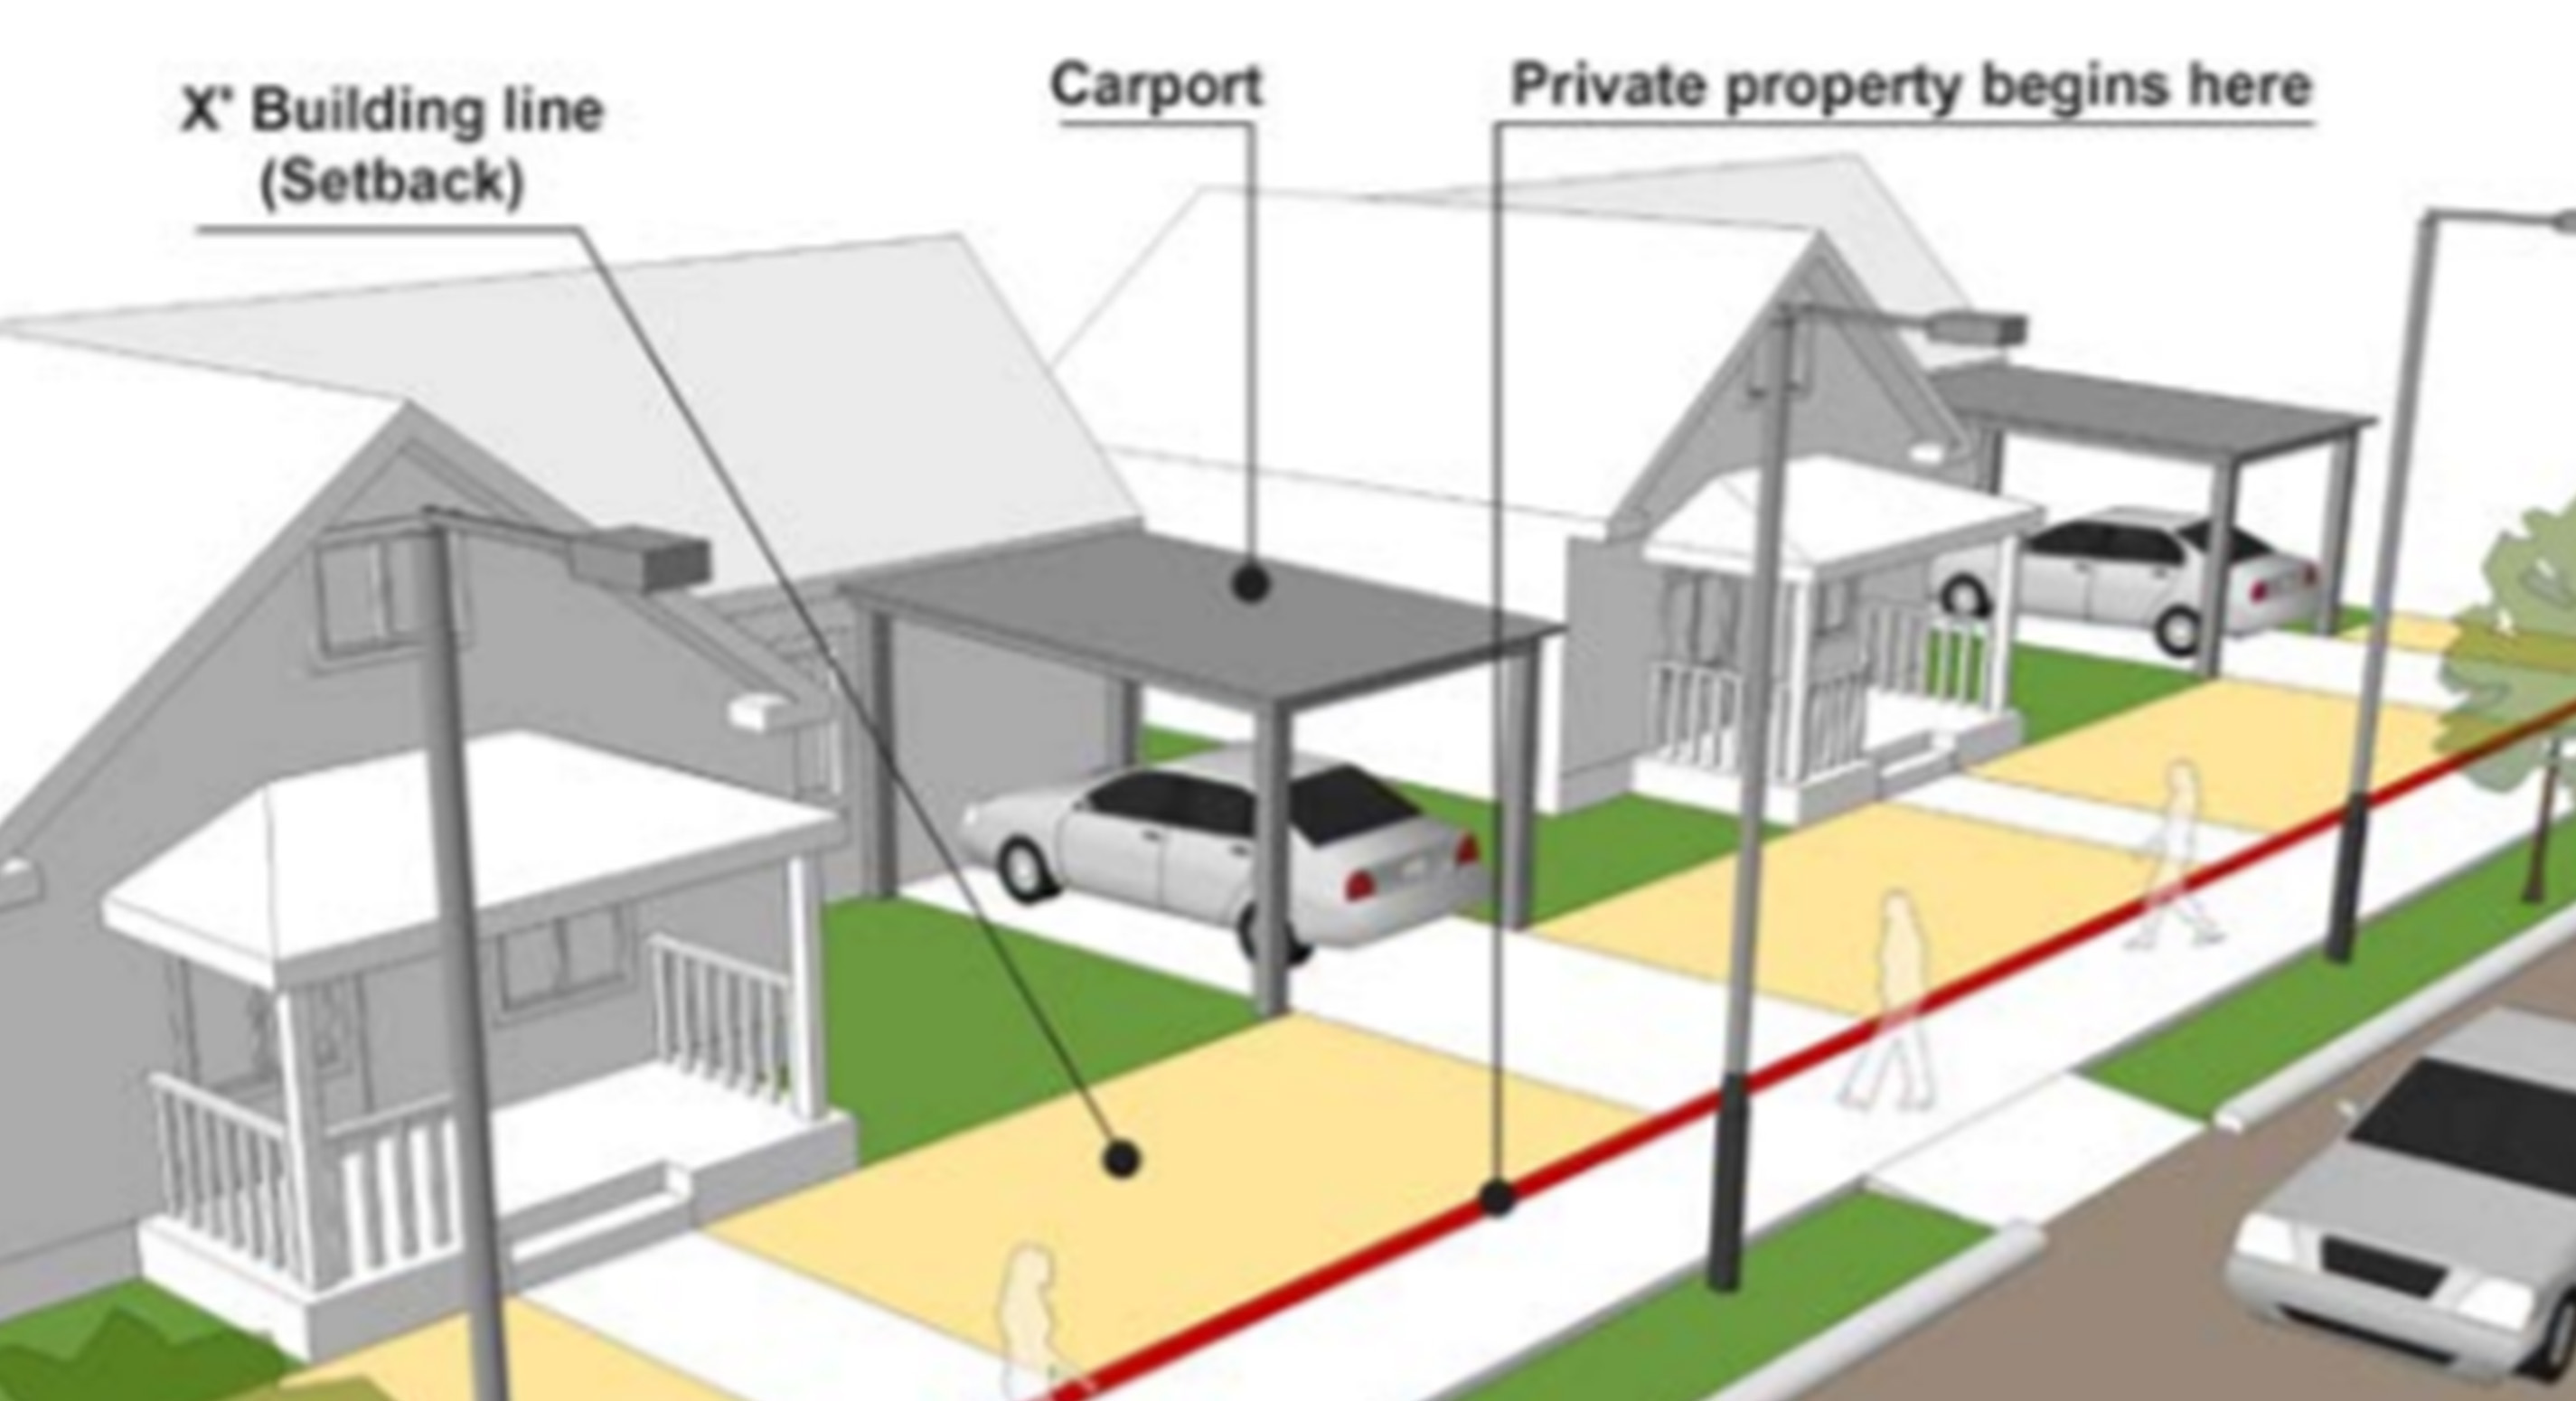 Want To Build A Carport?